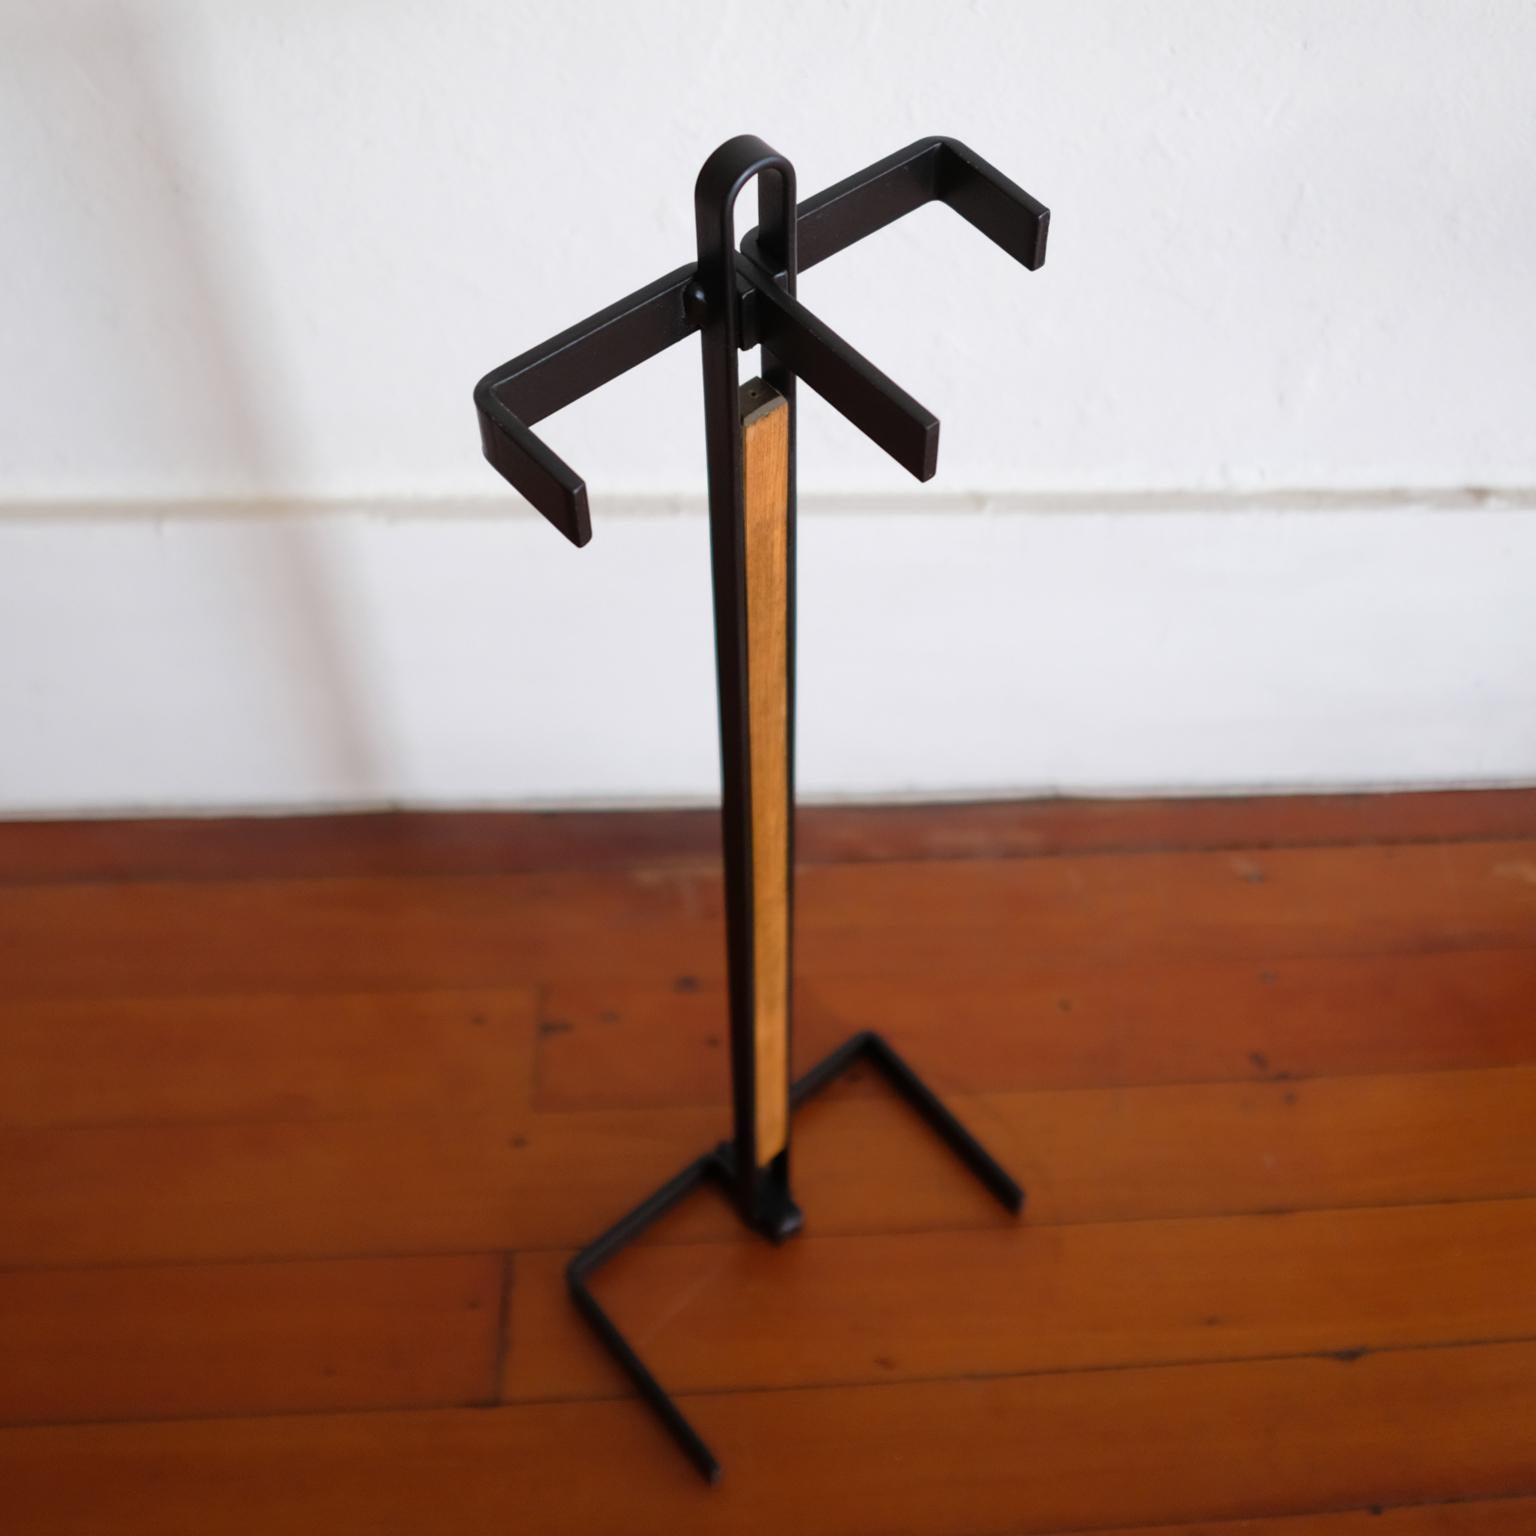 Mid-20th Century Modernist Iron and Wood Fire Tools